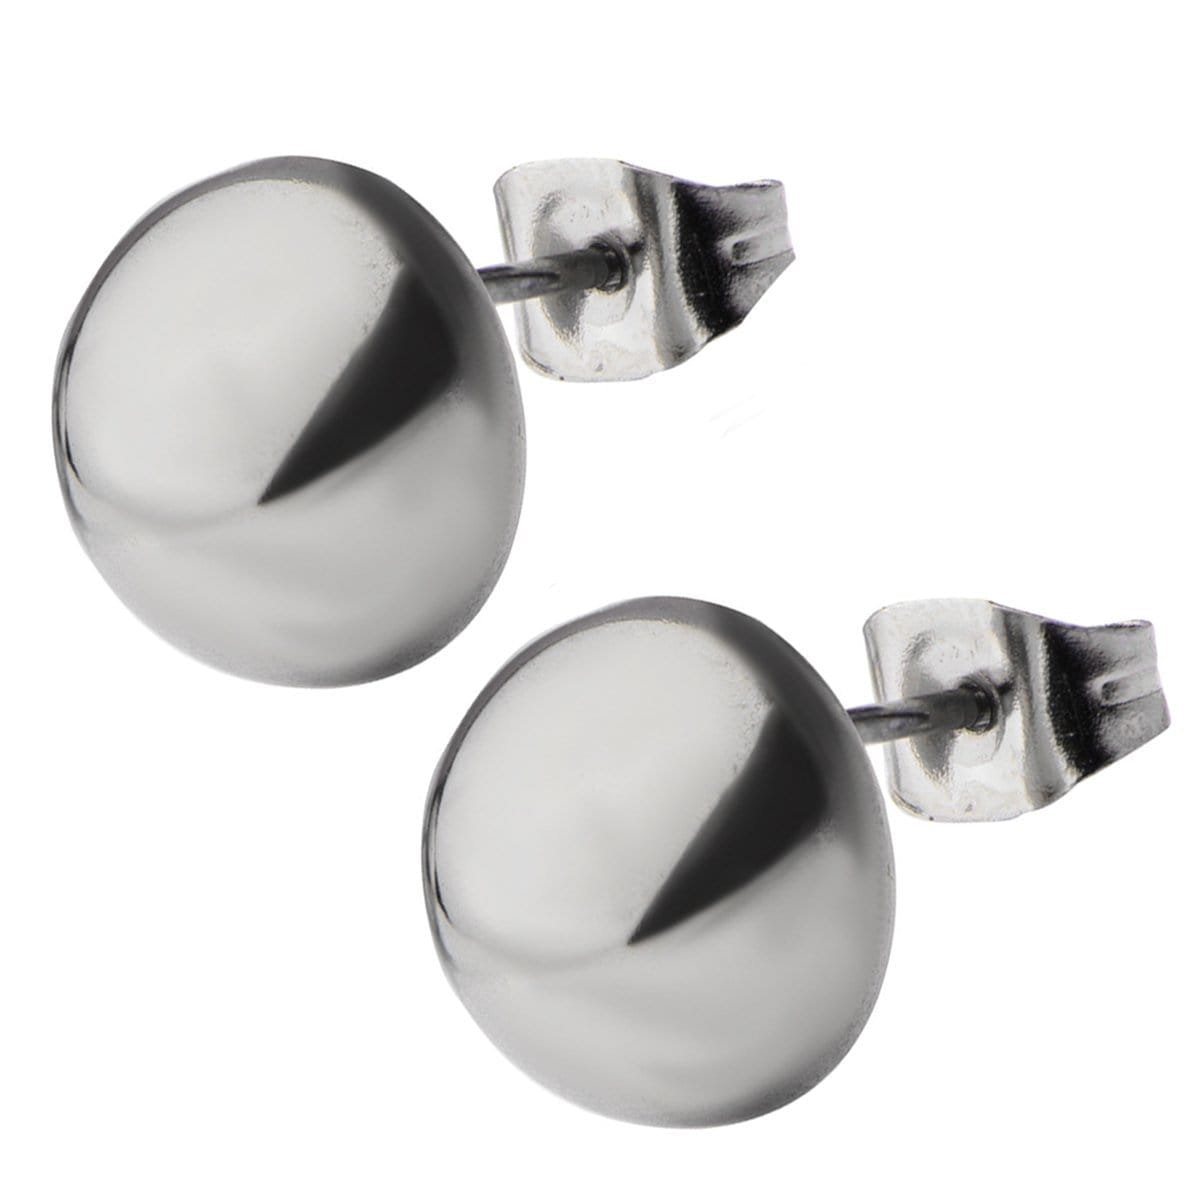 INOX JEWELRY Earrings Silver Tone Stainless Steel Small Round Dome Studs SSE4710